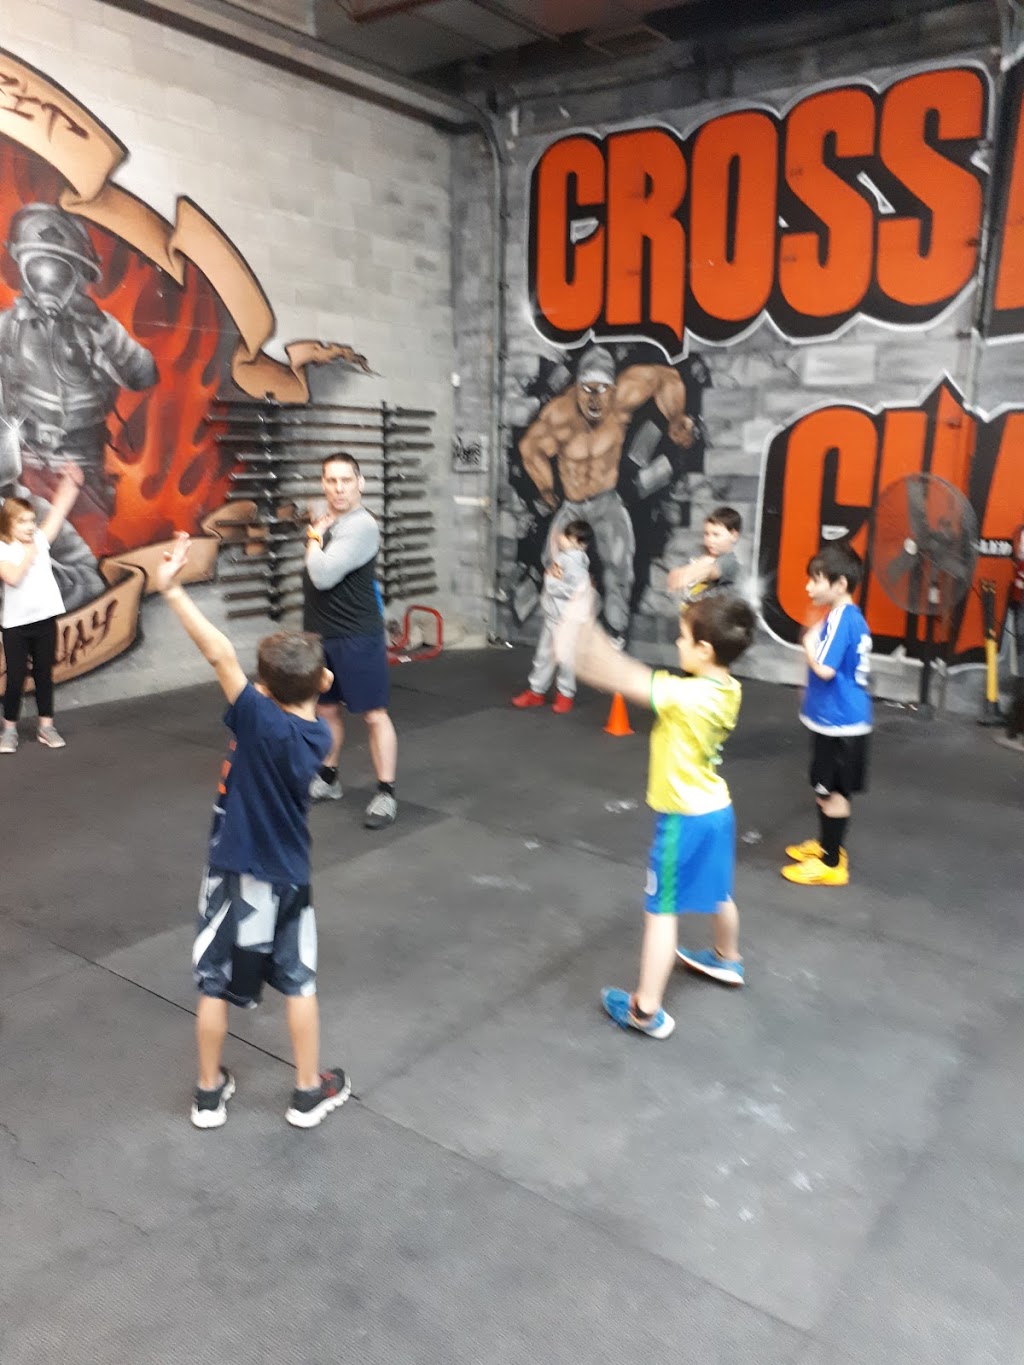 Crossfit Chateauguay | 2465 Boulevard Ford #202, Châteauguay, QC J6J 4Z2, Canada | Phone: (514) 656-5051